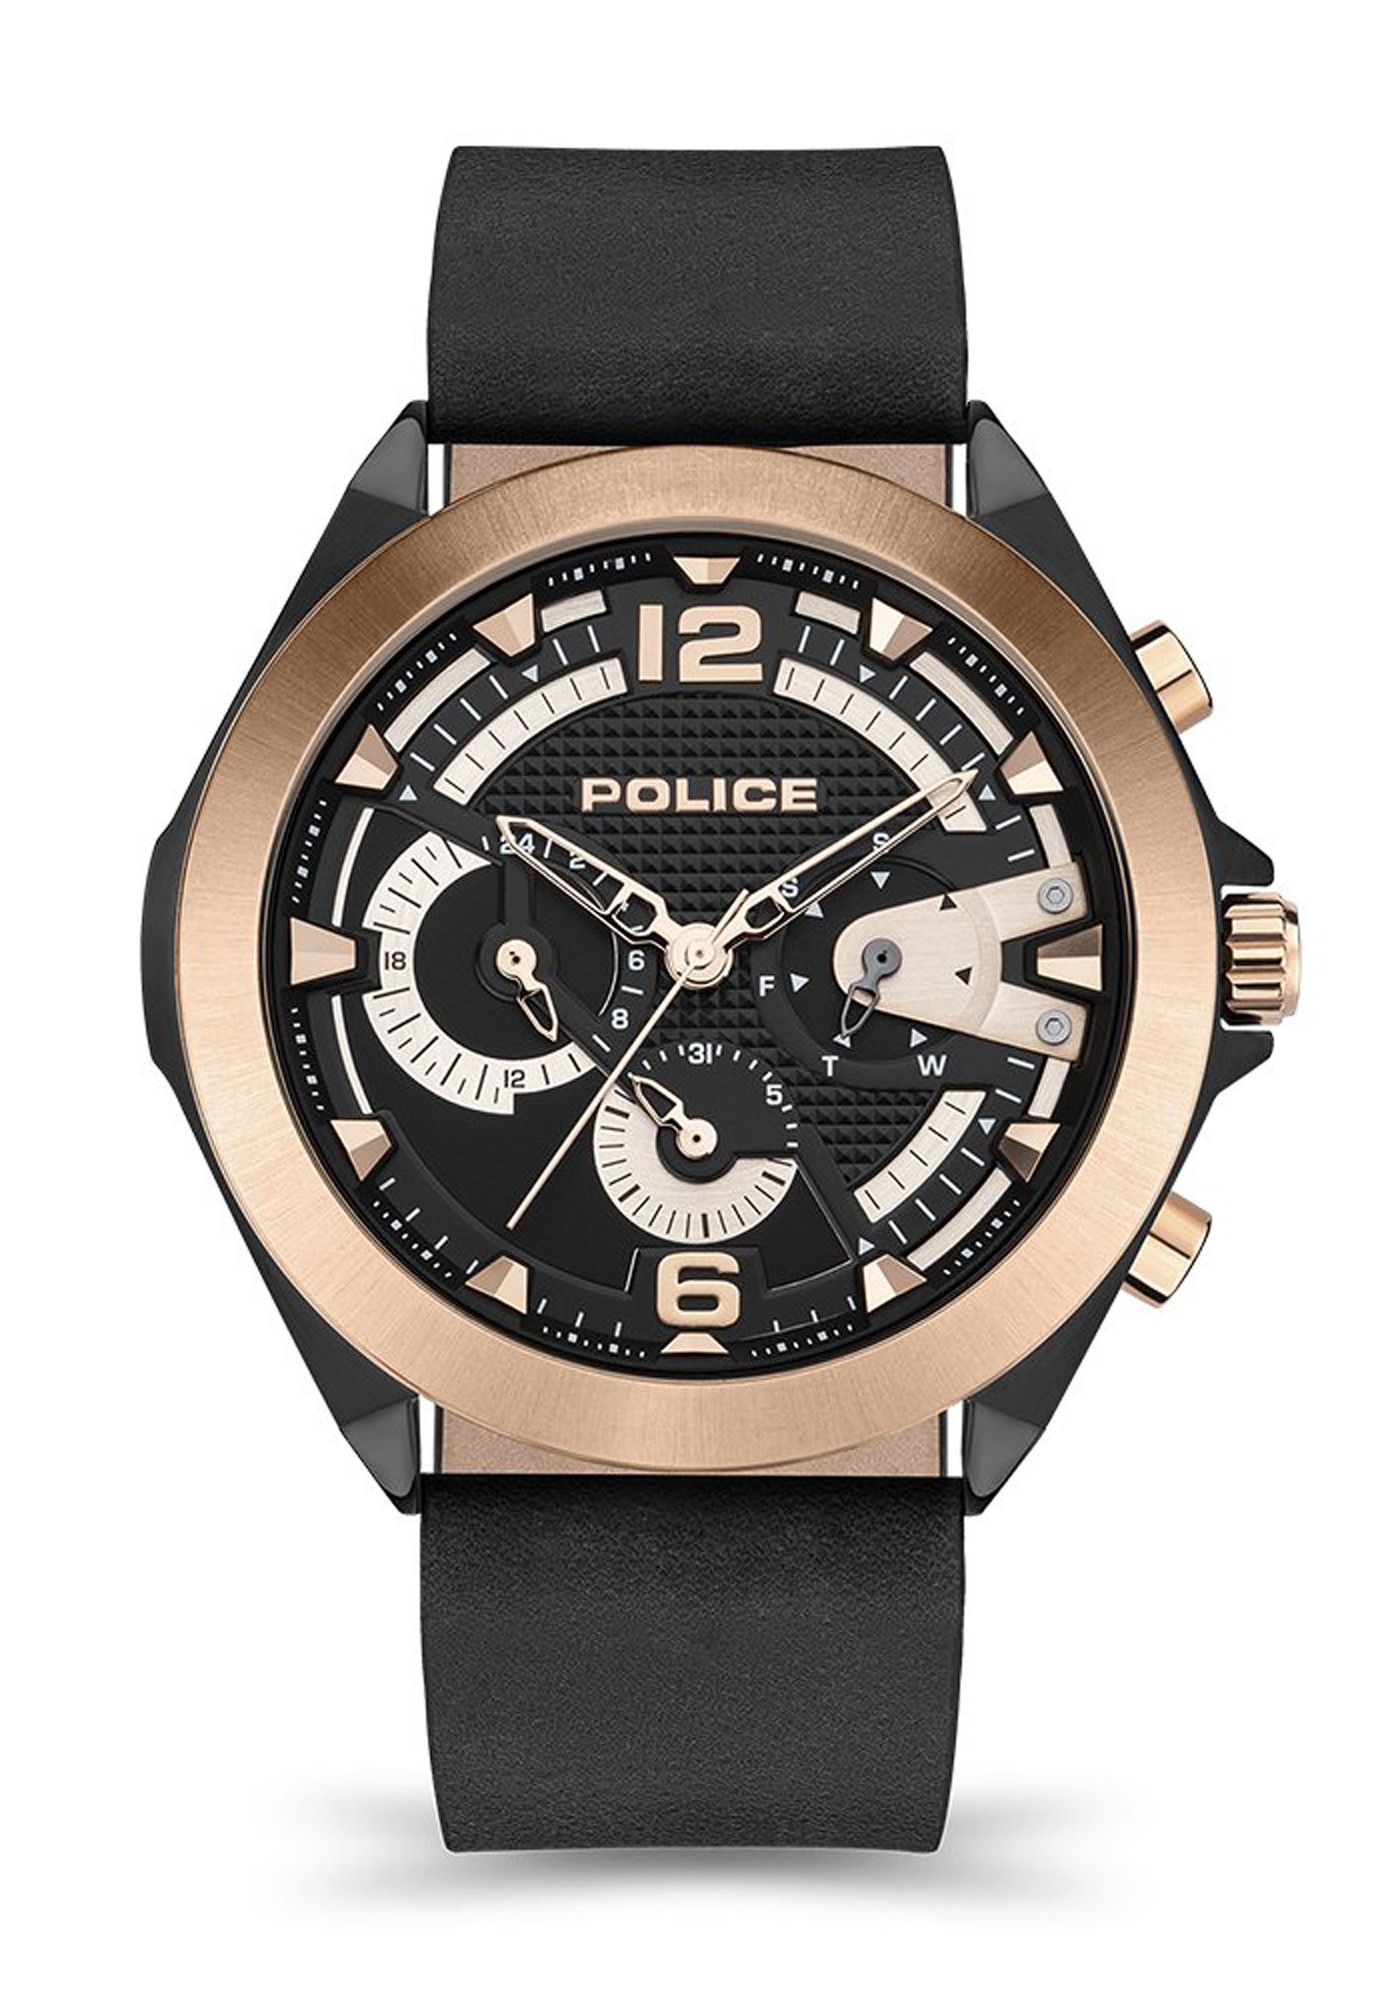 Police Men\'s Watch Police 152239 Police Tone With Stainless Comprar Steel Two Zenith With Strap Men\'s Men\'s Watch Leather Steel Two Watches Stainless Dial Watches Watch PEWJF2108740 and | Black Watch Zenith